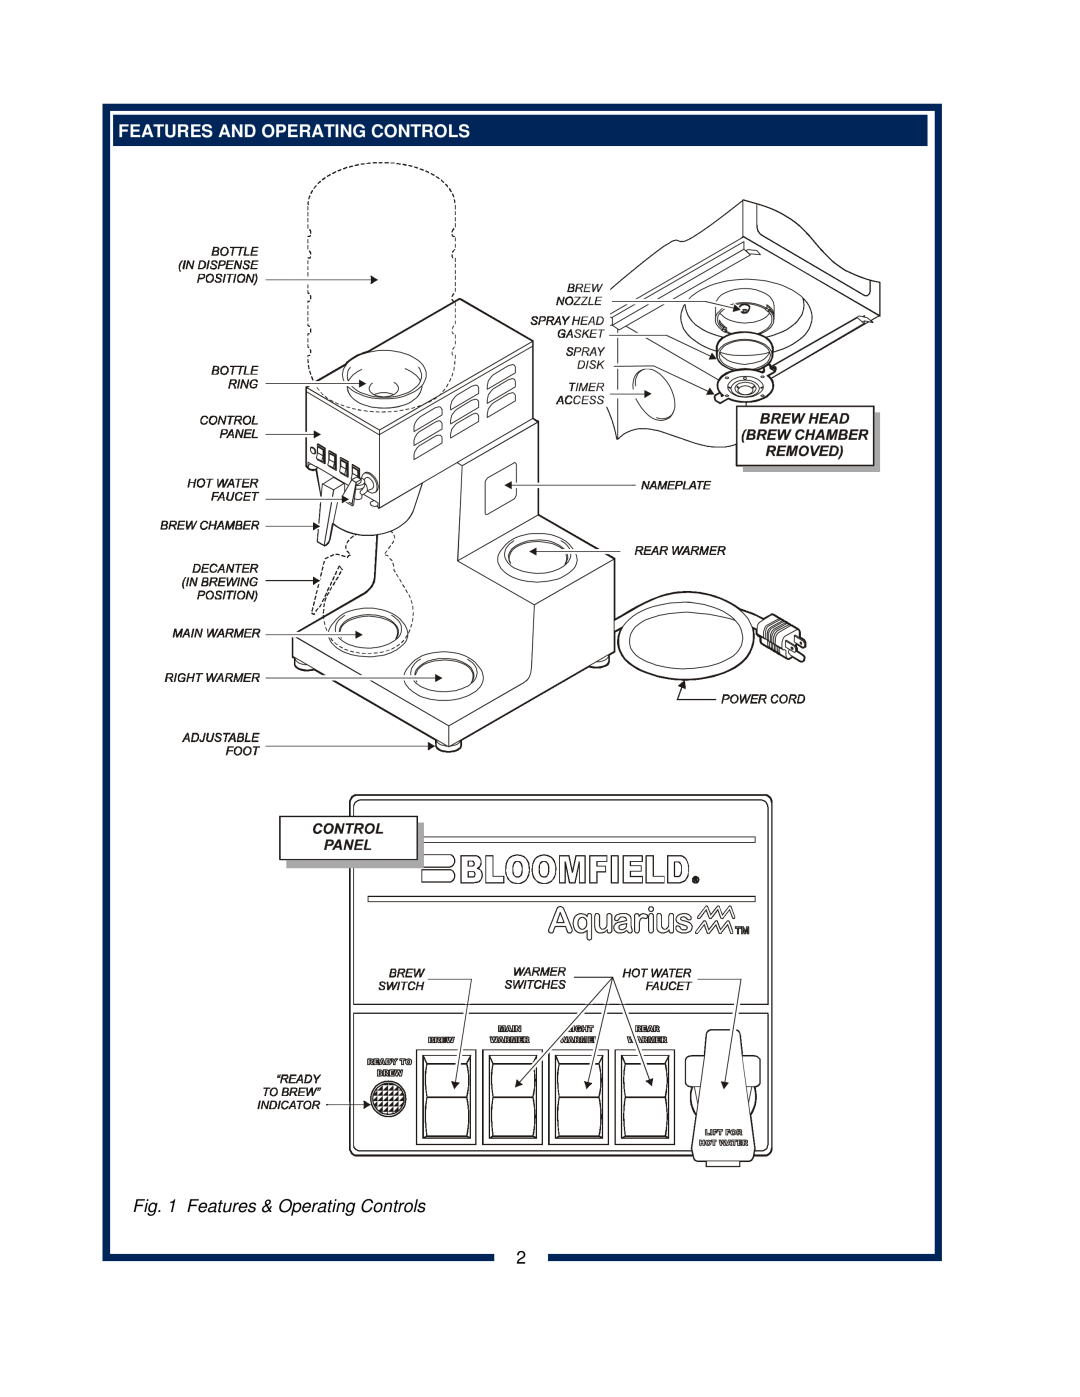 Bloomfield 8372 owner manual Features And Operating Controls, Features & Operating Controls 